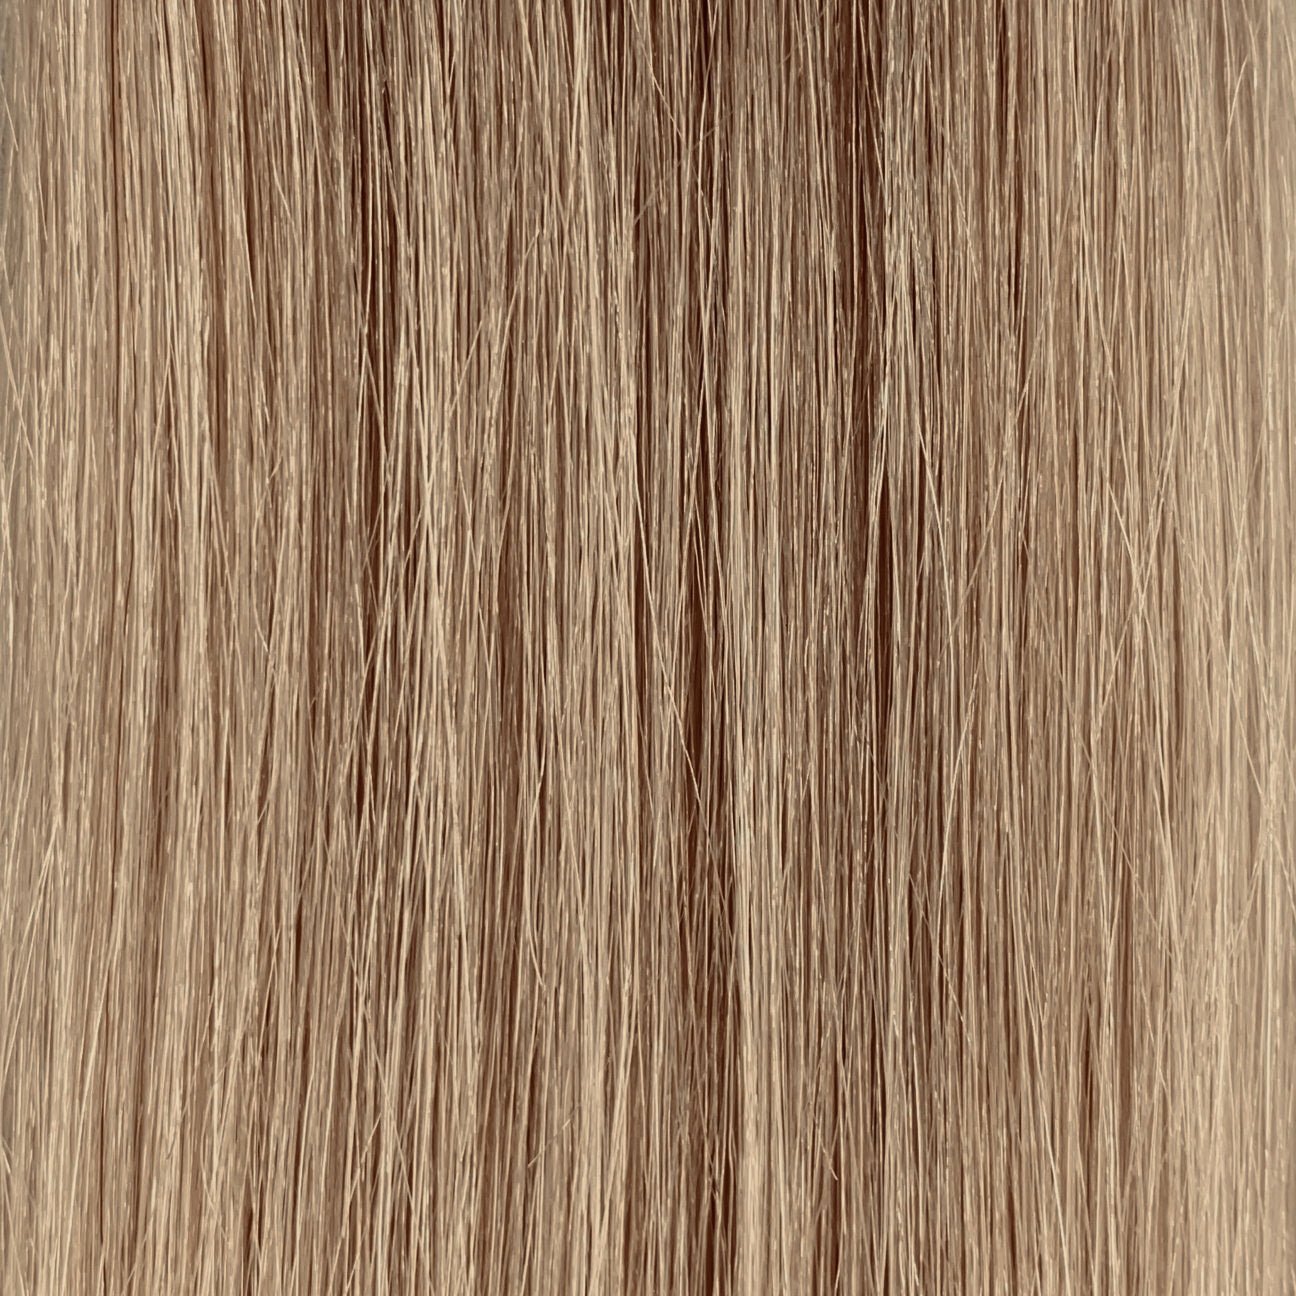 40 cm | Normal Tape Extensions | No. 10 natural blond